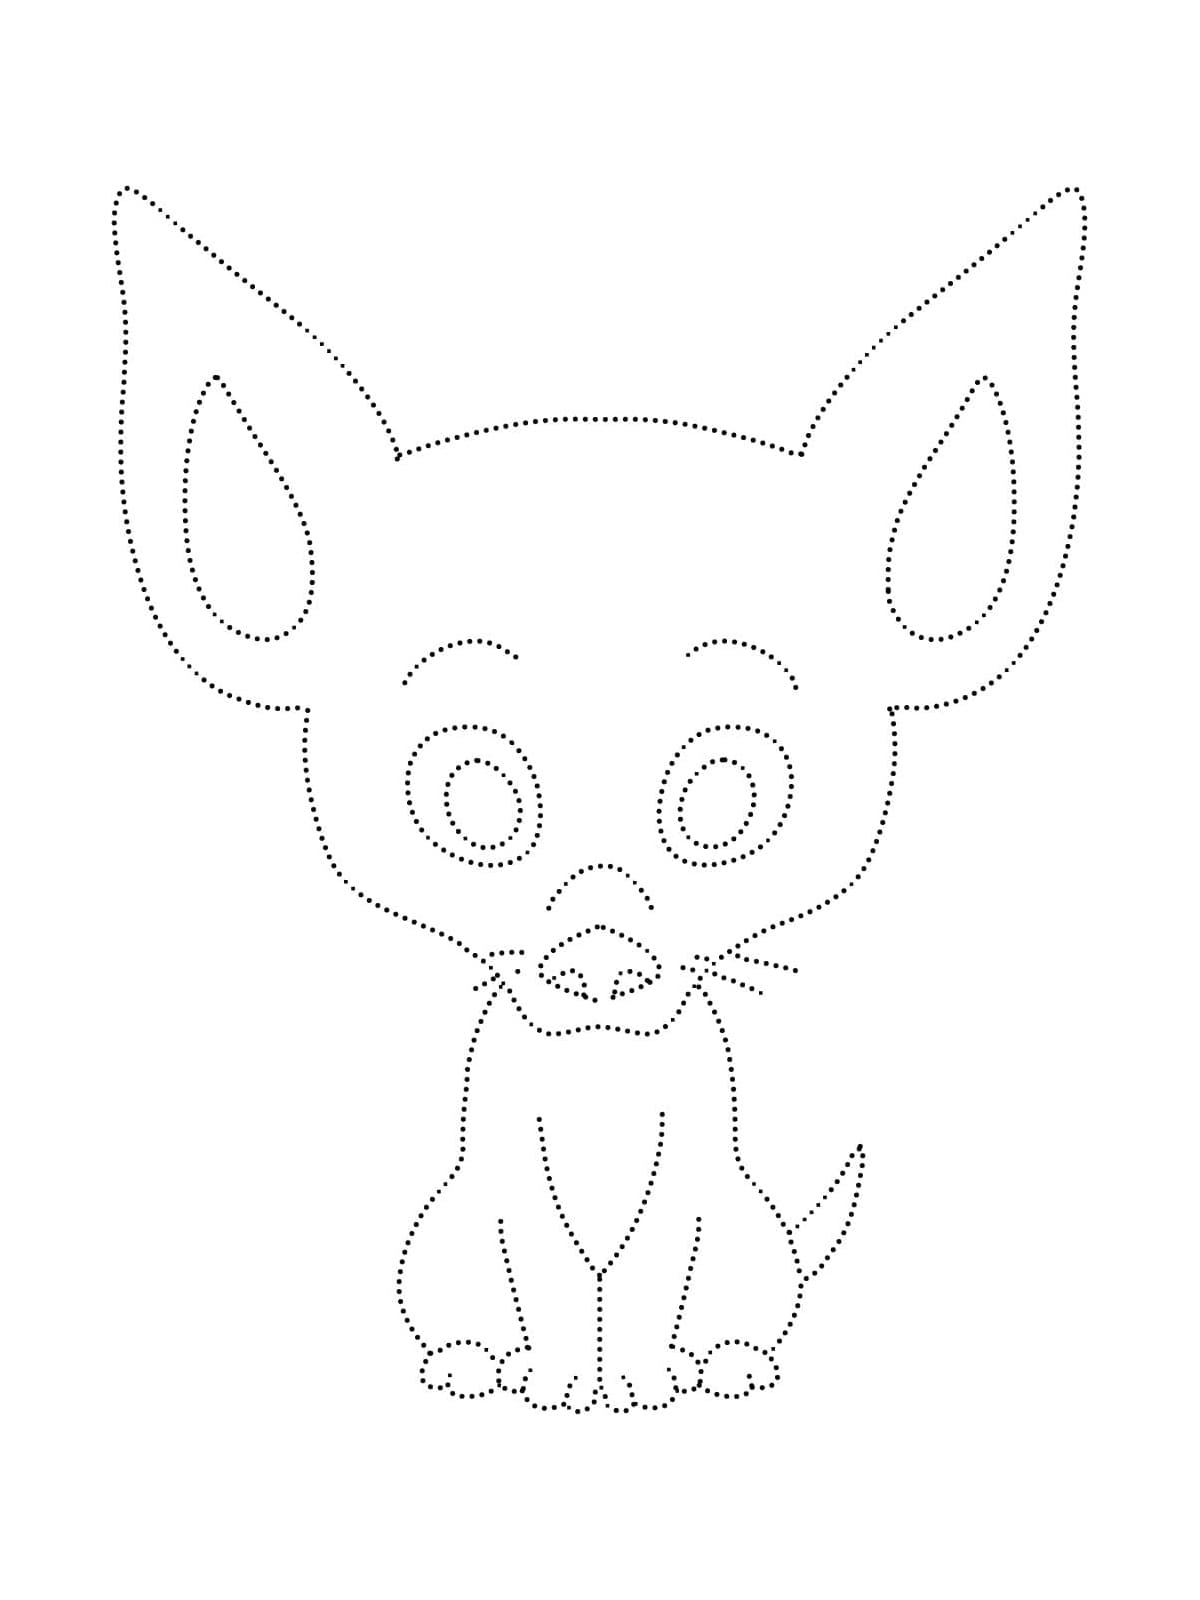 Chihuahua Dog Tracing coloring page - Download, Print or Color Online ...